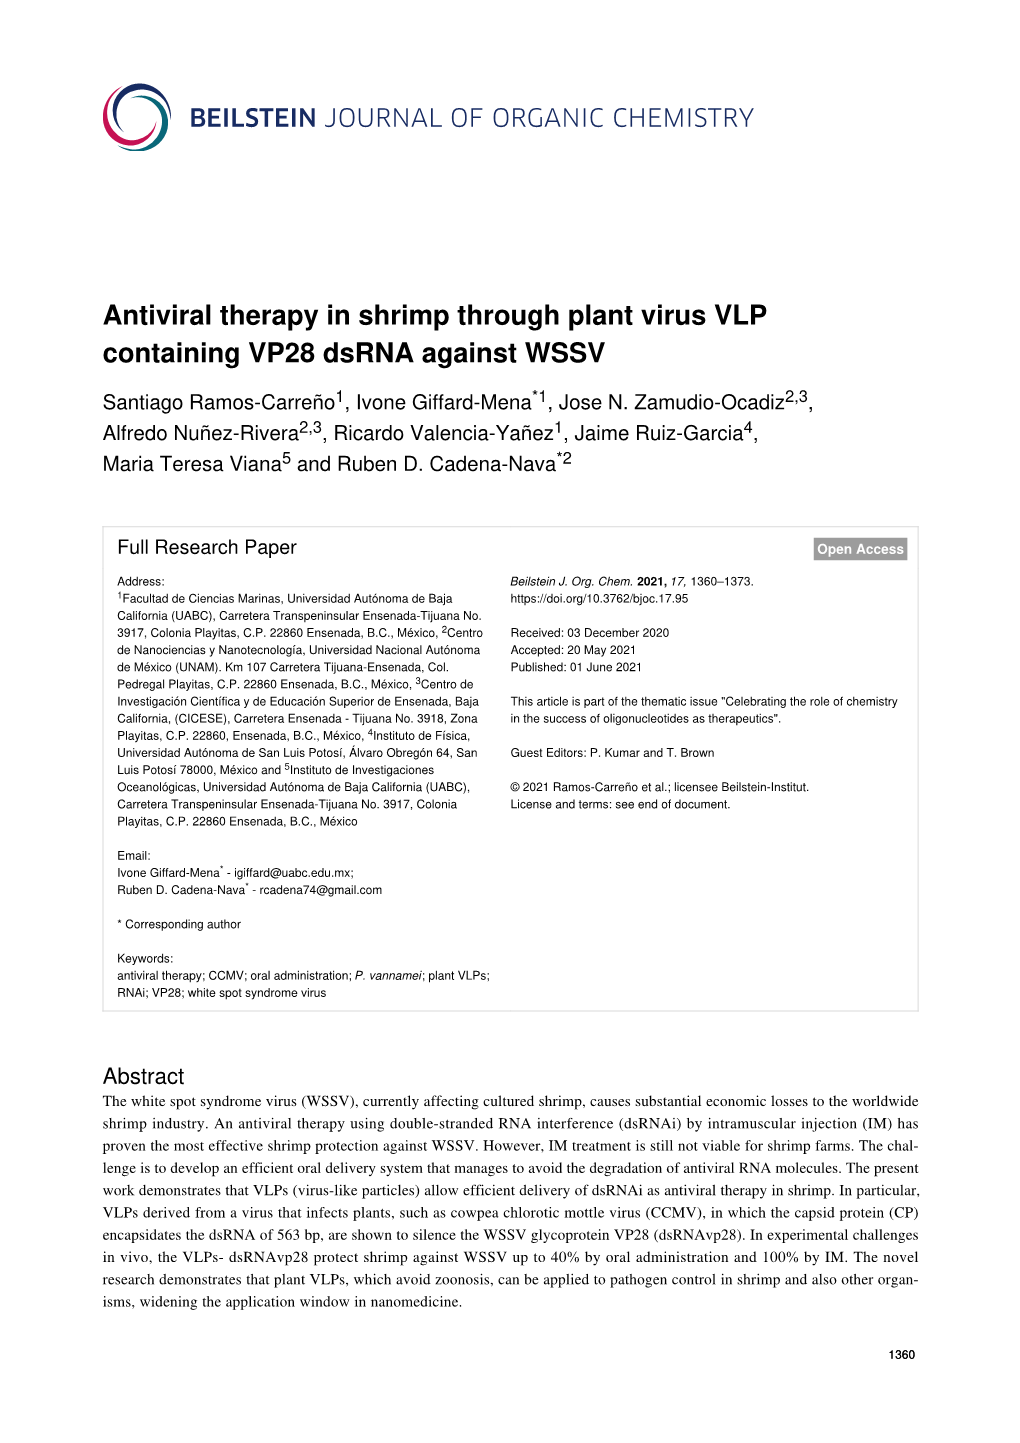 Antiviral Therapy in Shrimp Through Plant Virus VLP Containing VP28 Dsrna Against WSSV